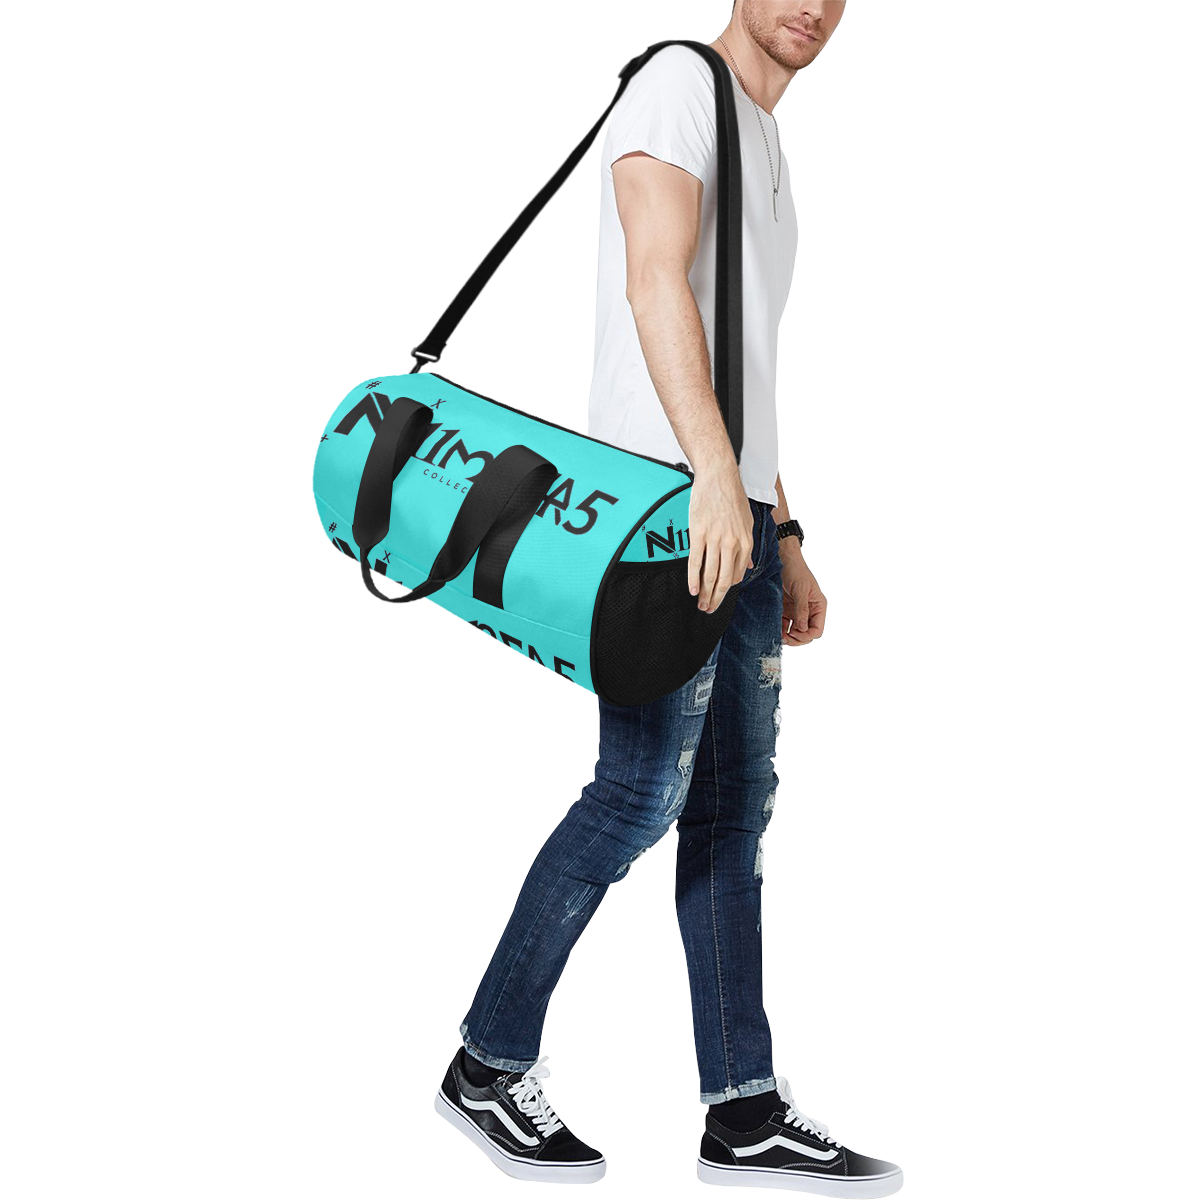 NUMBERS Collection Teal/ Black Duffle Bag (Model 1679)